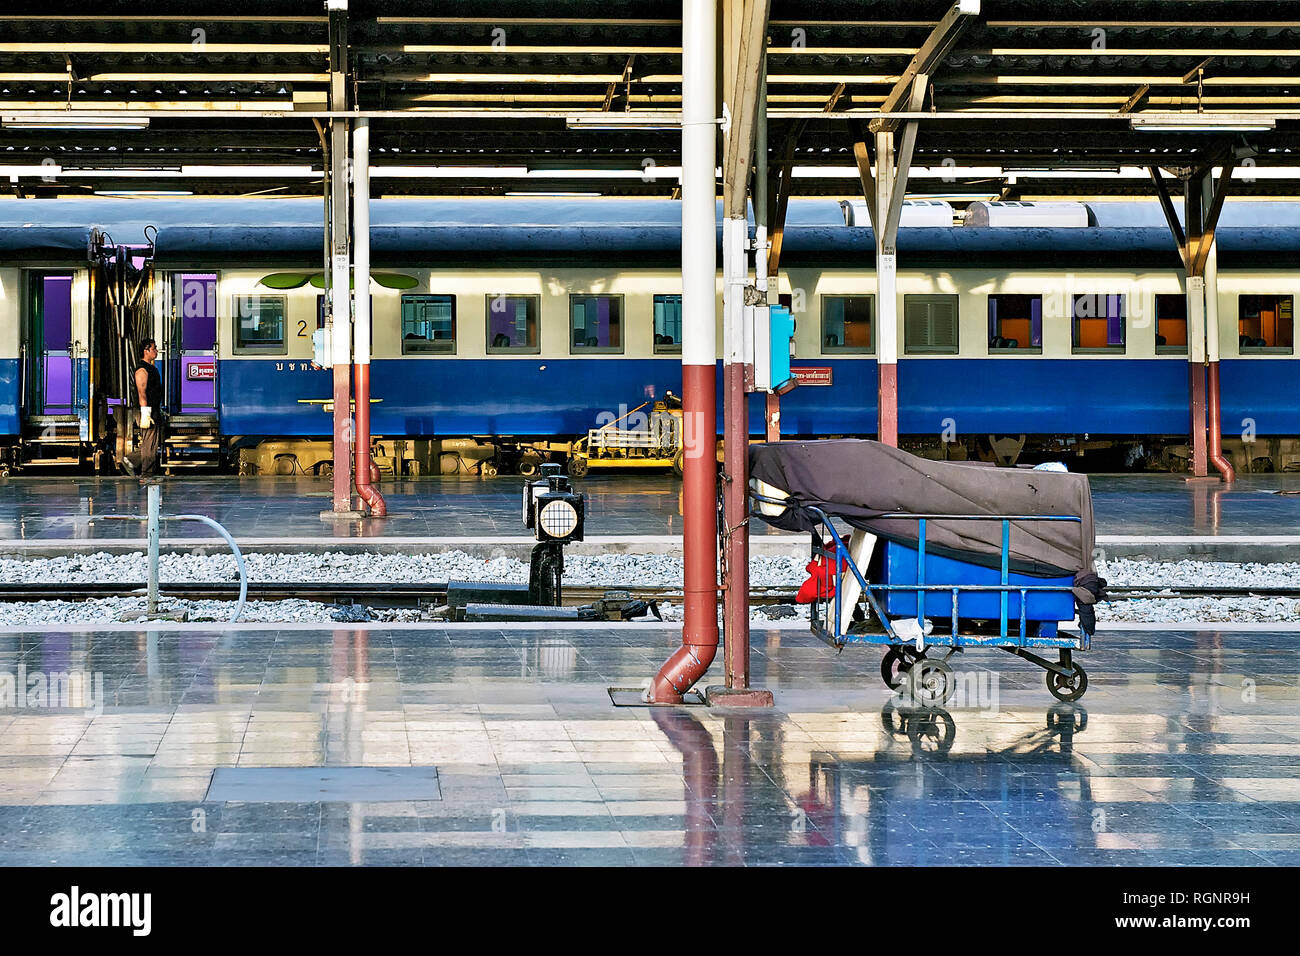 Hualamphong Central Train Station in Bangkok, Thailand - June 15 2011: Coaches at a very empty and very clean looking platform Stock Photo